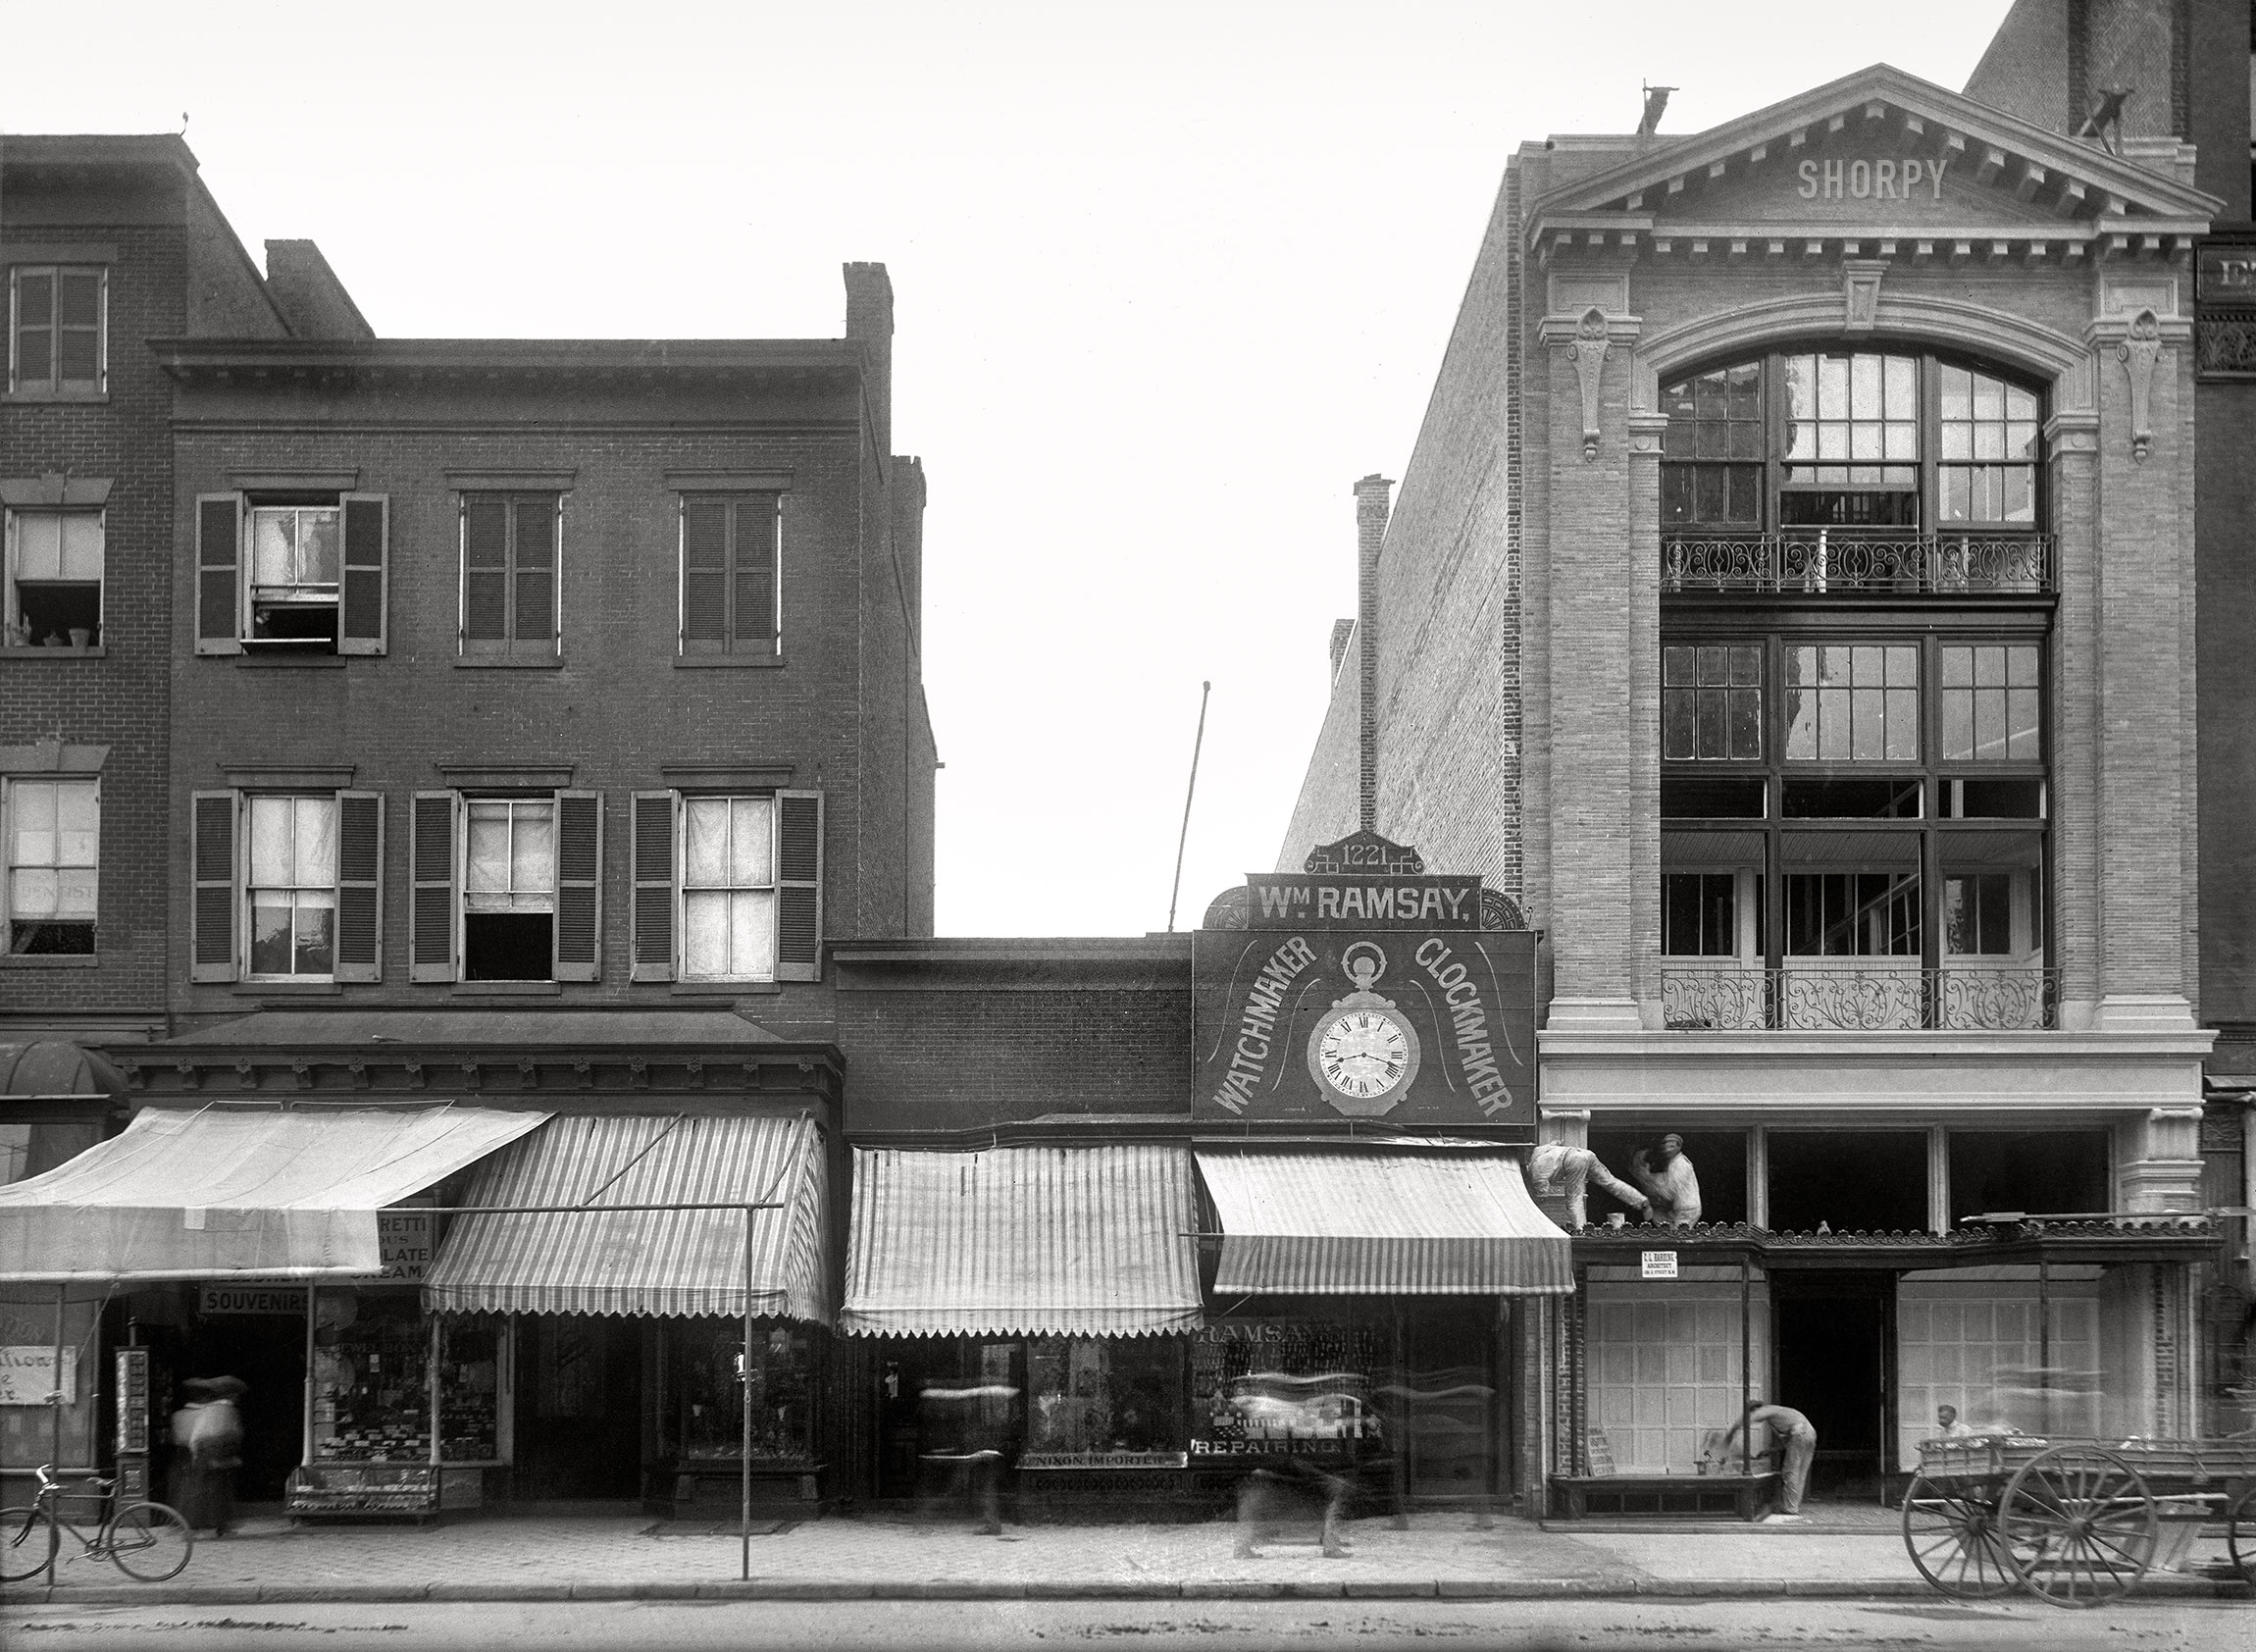 Washington, D.C., circa 1901. "View of F Street N.W., north side, between 12th & 13th Streets, showing various business fronts along the block." 5x7 inch glass negative. View full size.